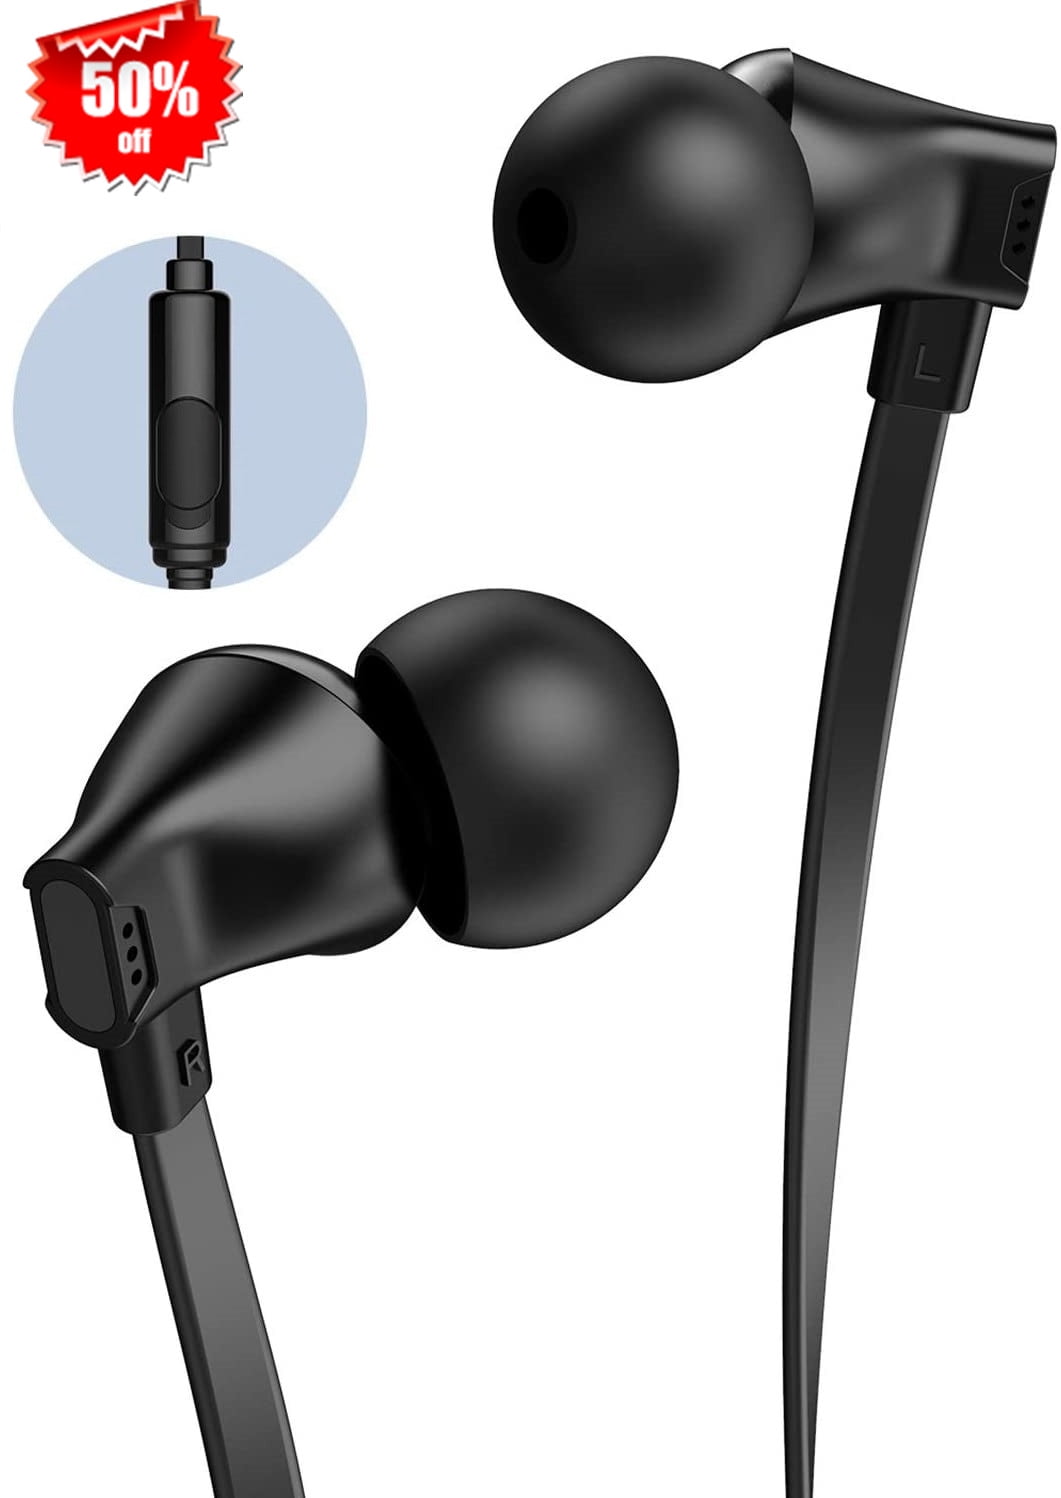 Earphones,in-Ear Headphones Stereo Earbuds with Microphone for iPhone, iPod, iPad, Samsung Black